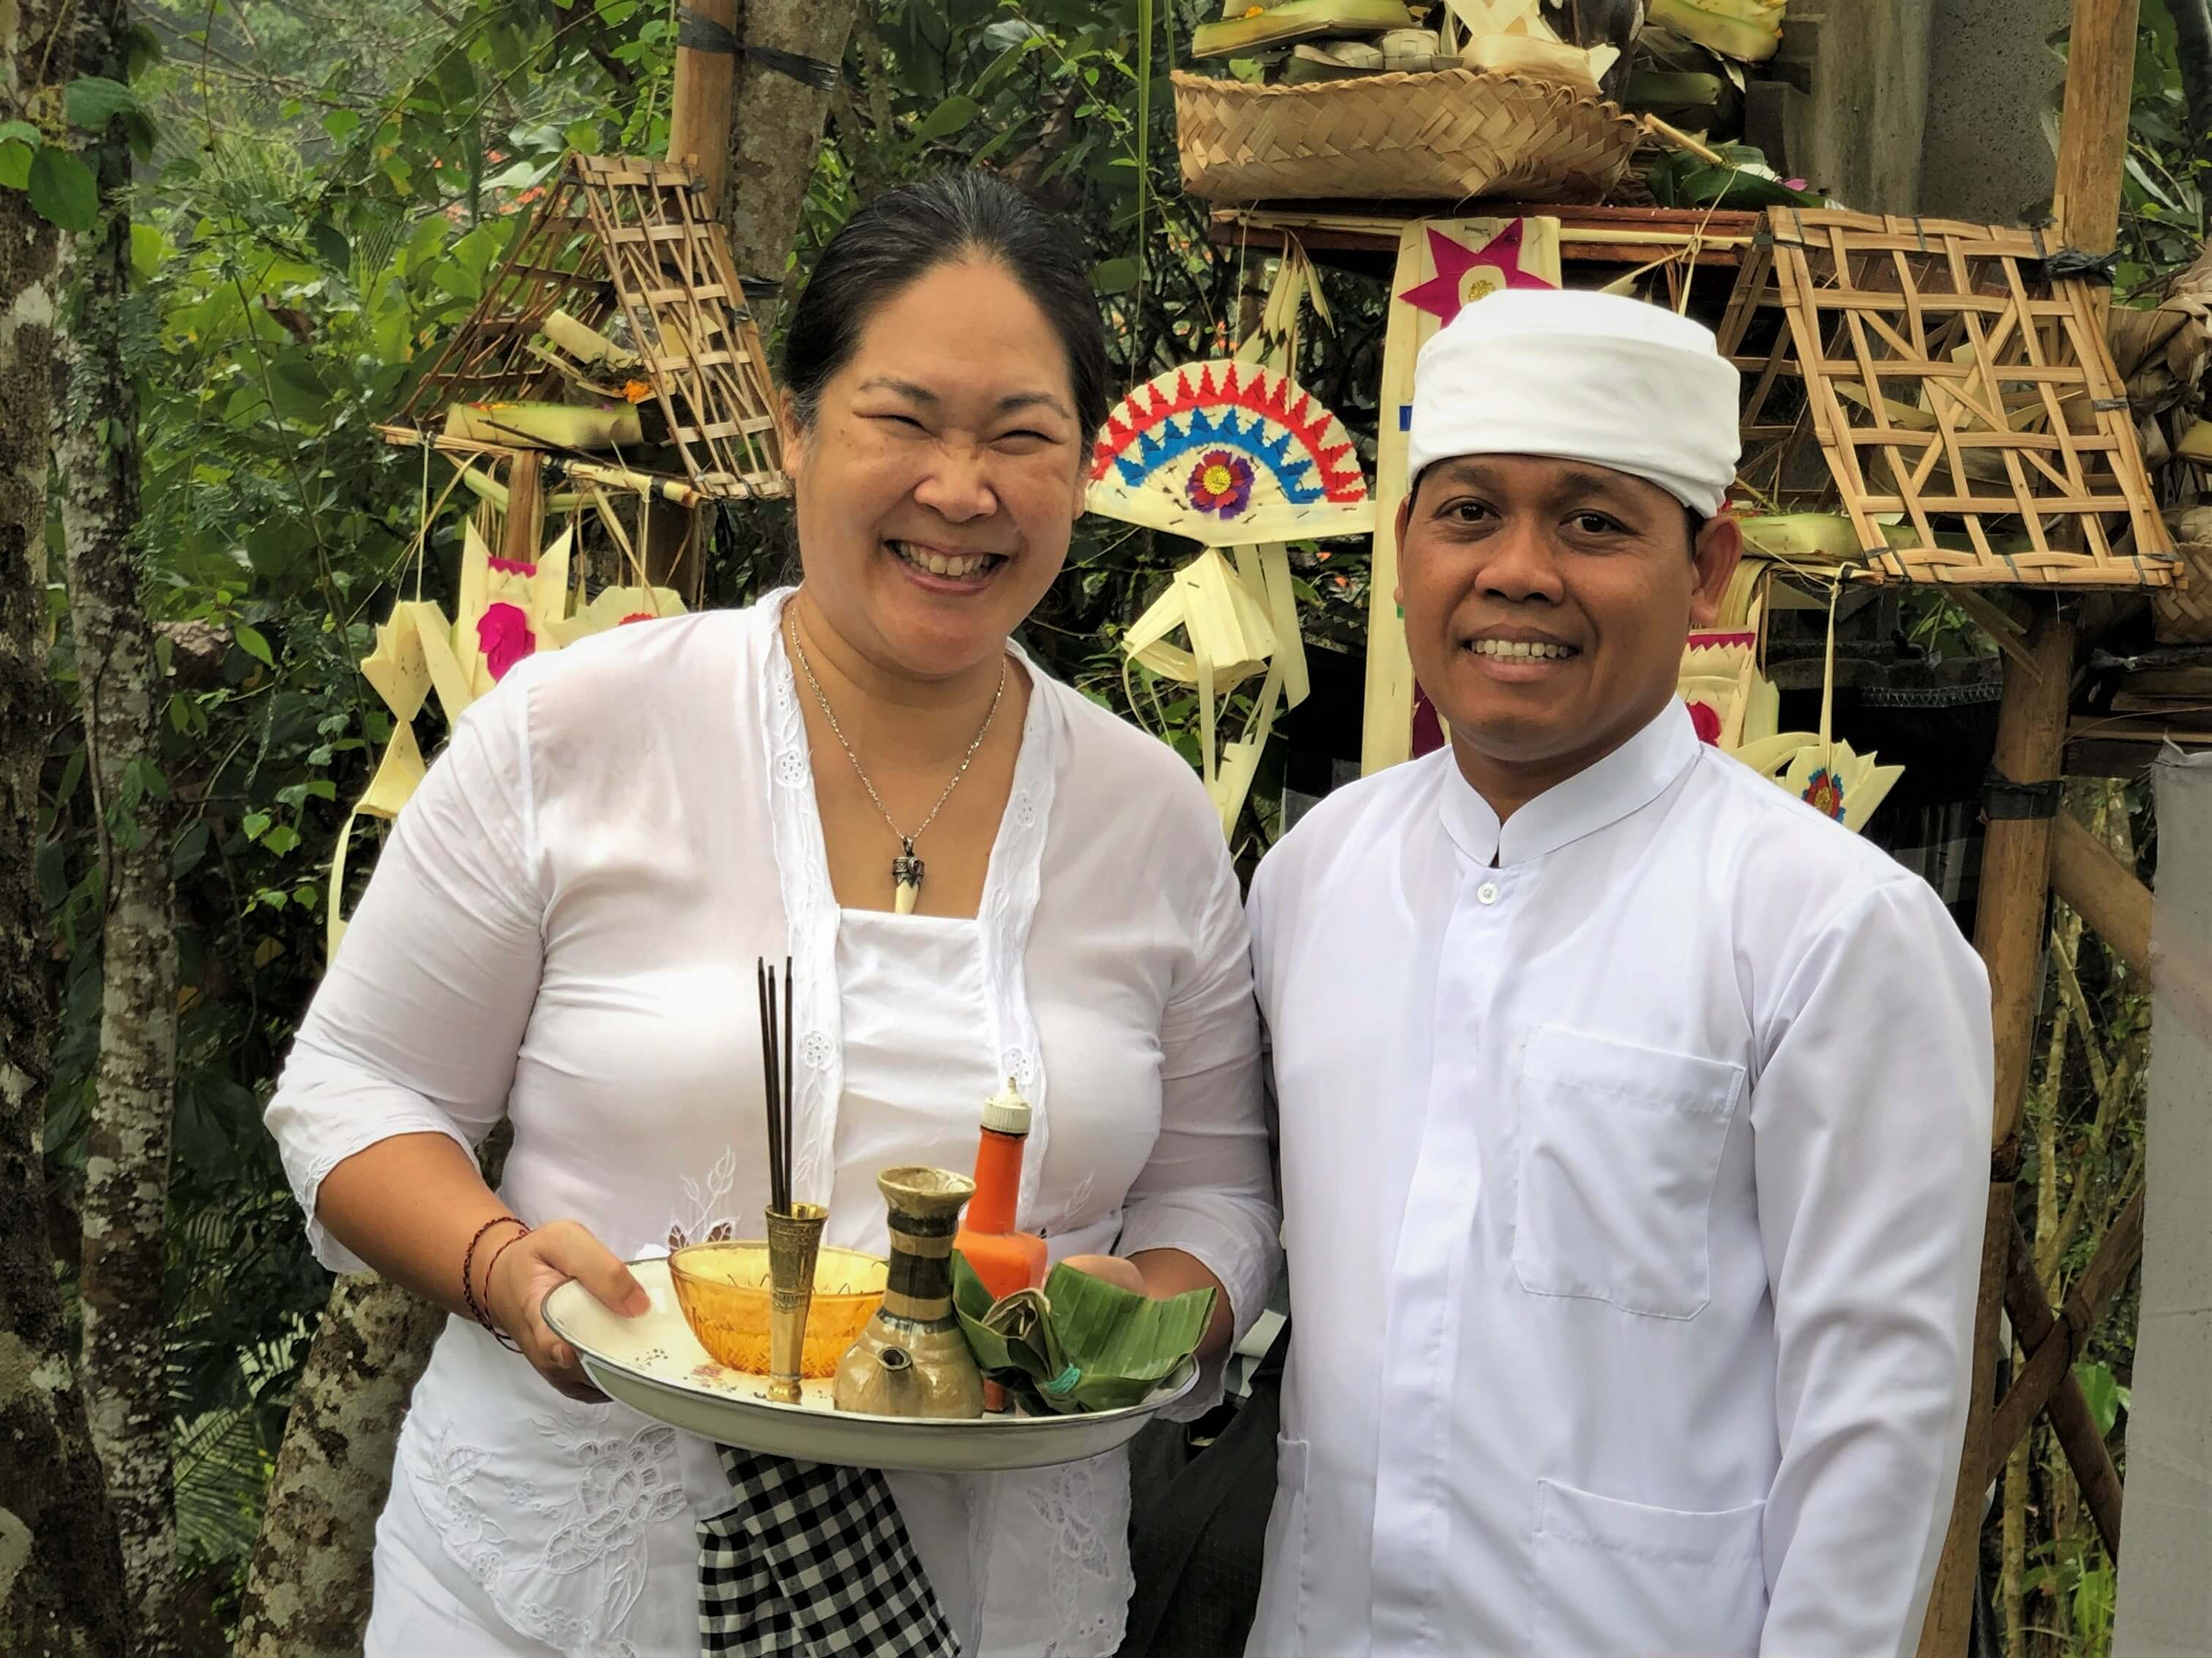 Frances (left) and Adi, the forces behind Feed Bali, an initiative to support communities in need with care packages. Photo courtesy of Tresna Bali Cooking School 